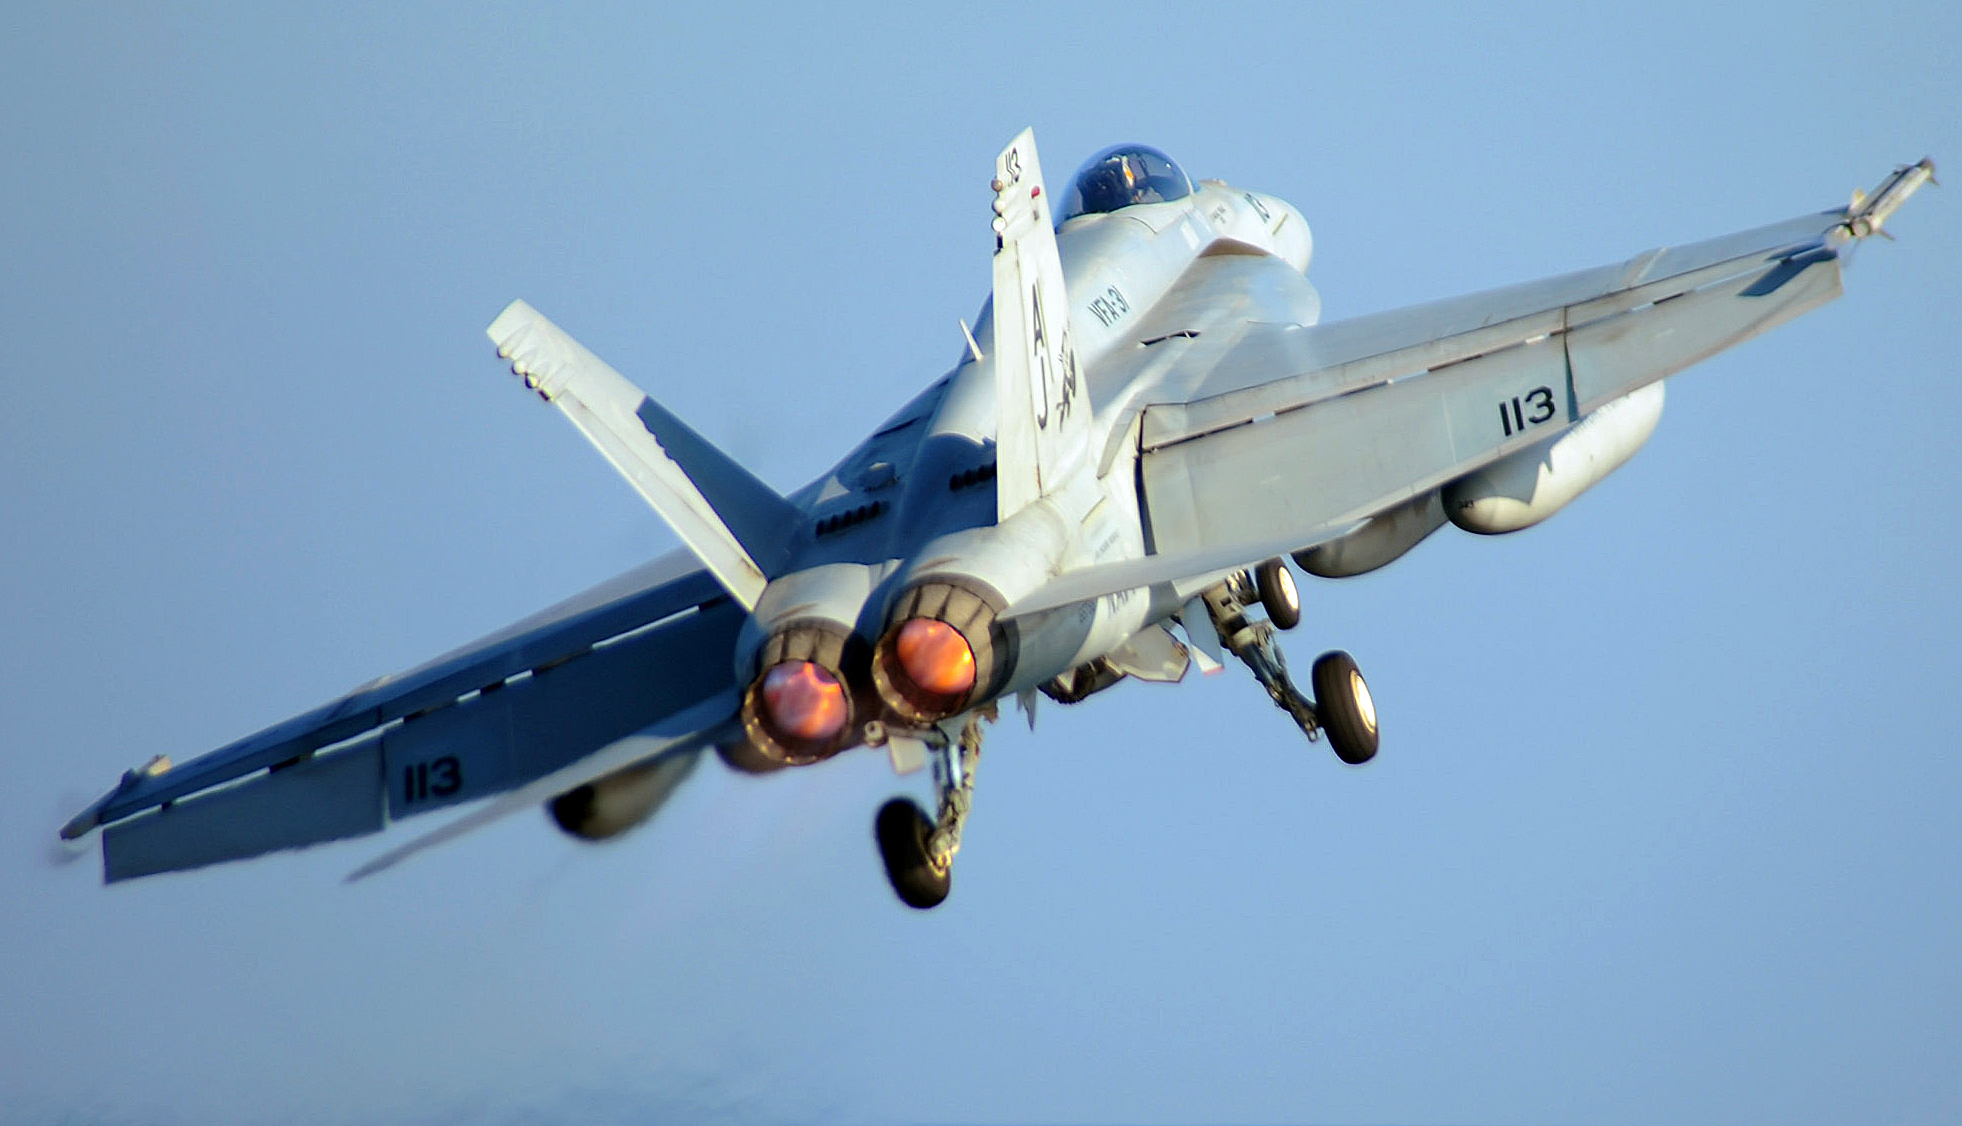 An F/A-18 Super Hornet assigned to the "Tomcatters" of Strike Fighter Squadron 31 launches from the flight deck of the Nimitz-class aircraft carrier USS Theodore Roosevelt. Theodore Roosevelt and embarked Carrier Air Wing 8 are operating in the U.S. 5th Fleet area of responsibility and are focused on reassuring regional partners of the United States' commitment to security, which promotes stability and global prosperity (U.S. Navy photo by Mass Communication Specialist 3rd Class Jonathan Snyder/Released)